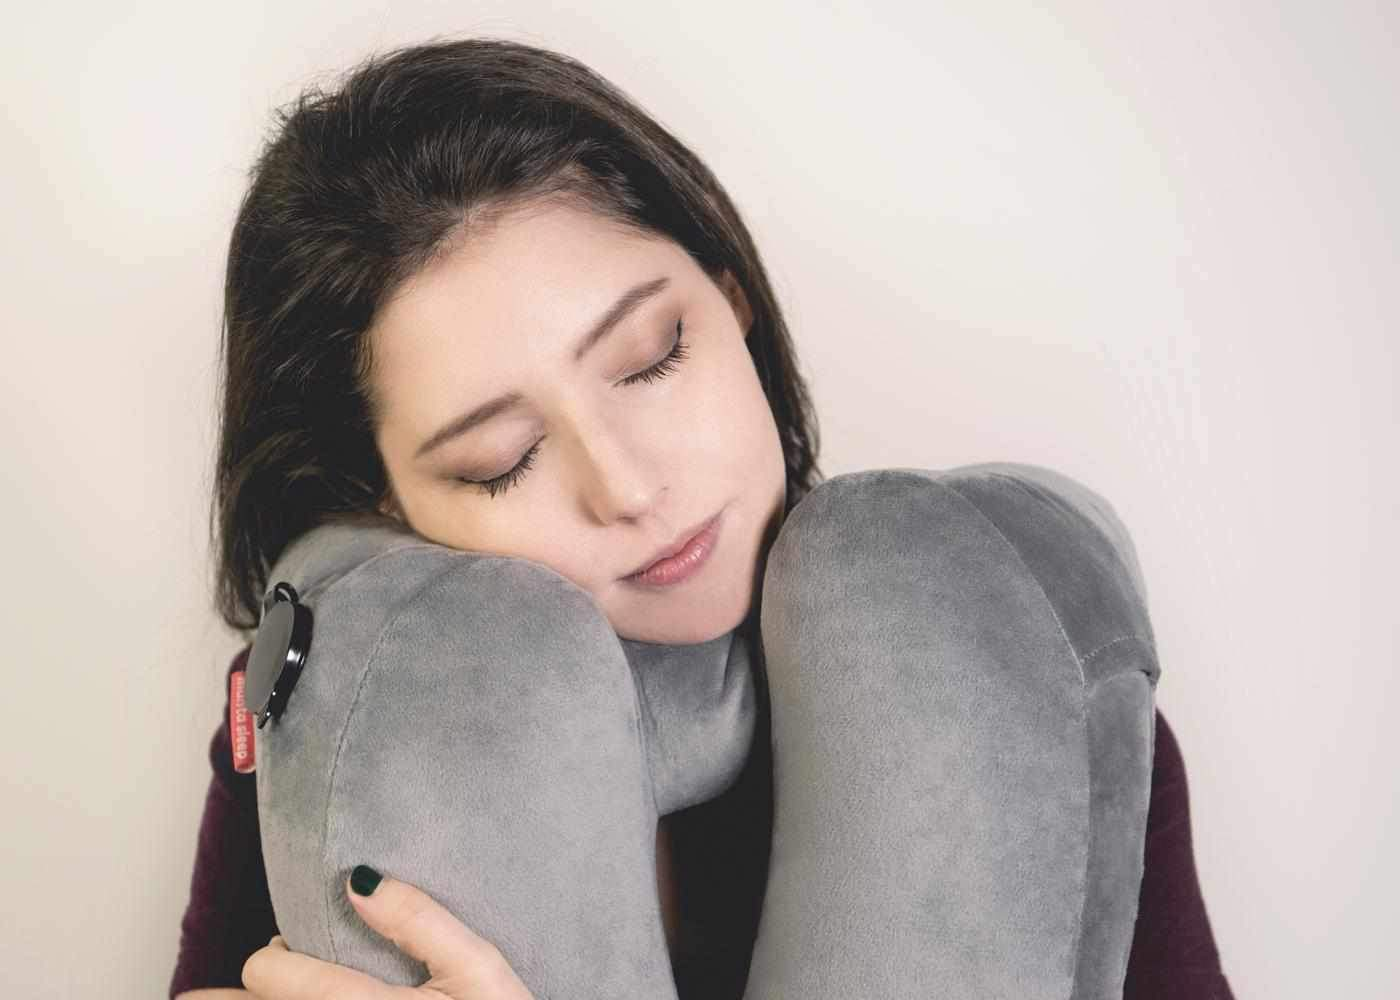 A girl napping on a gray travel pillow.